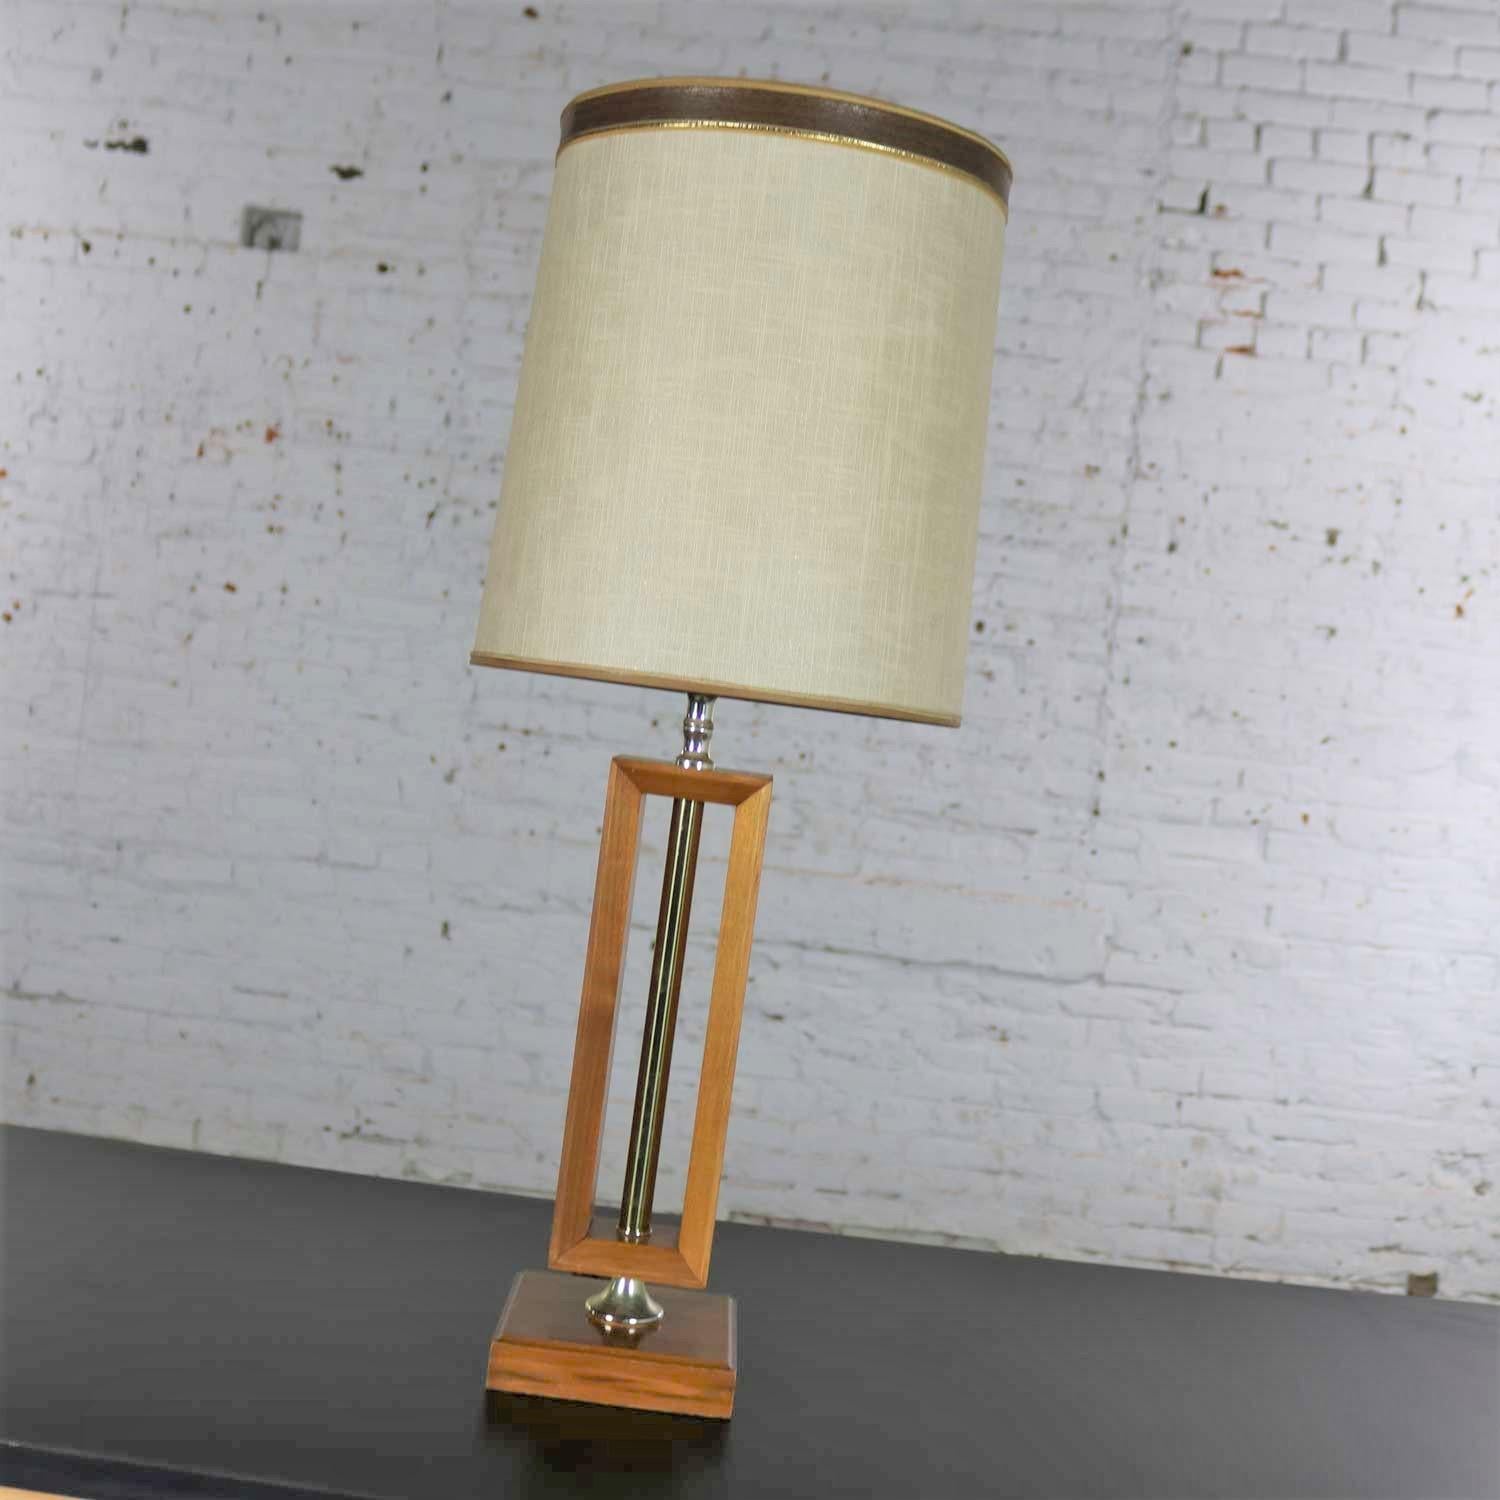 Handsome small-scale Mid-Century Modern lamp in walnut with brass detail in the style of Laurel Lamp Mfg. Co. It is in wonderful condition having been rewired and given a new socket. The walnut and brass are beautiful, and it retains its original